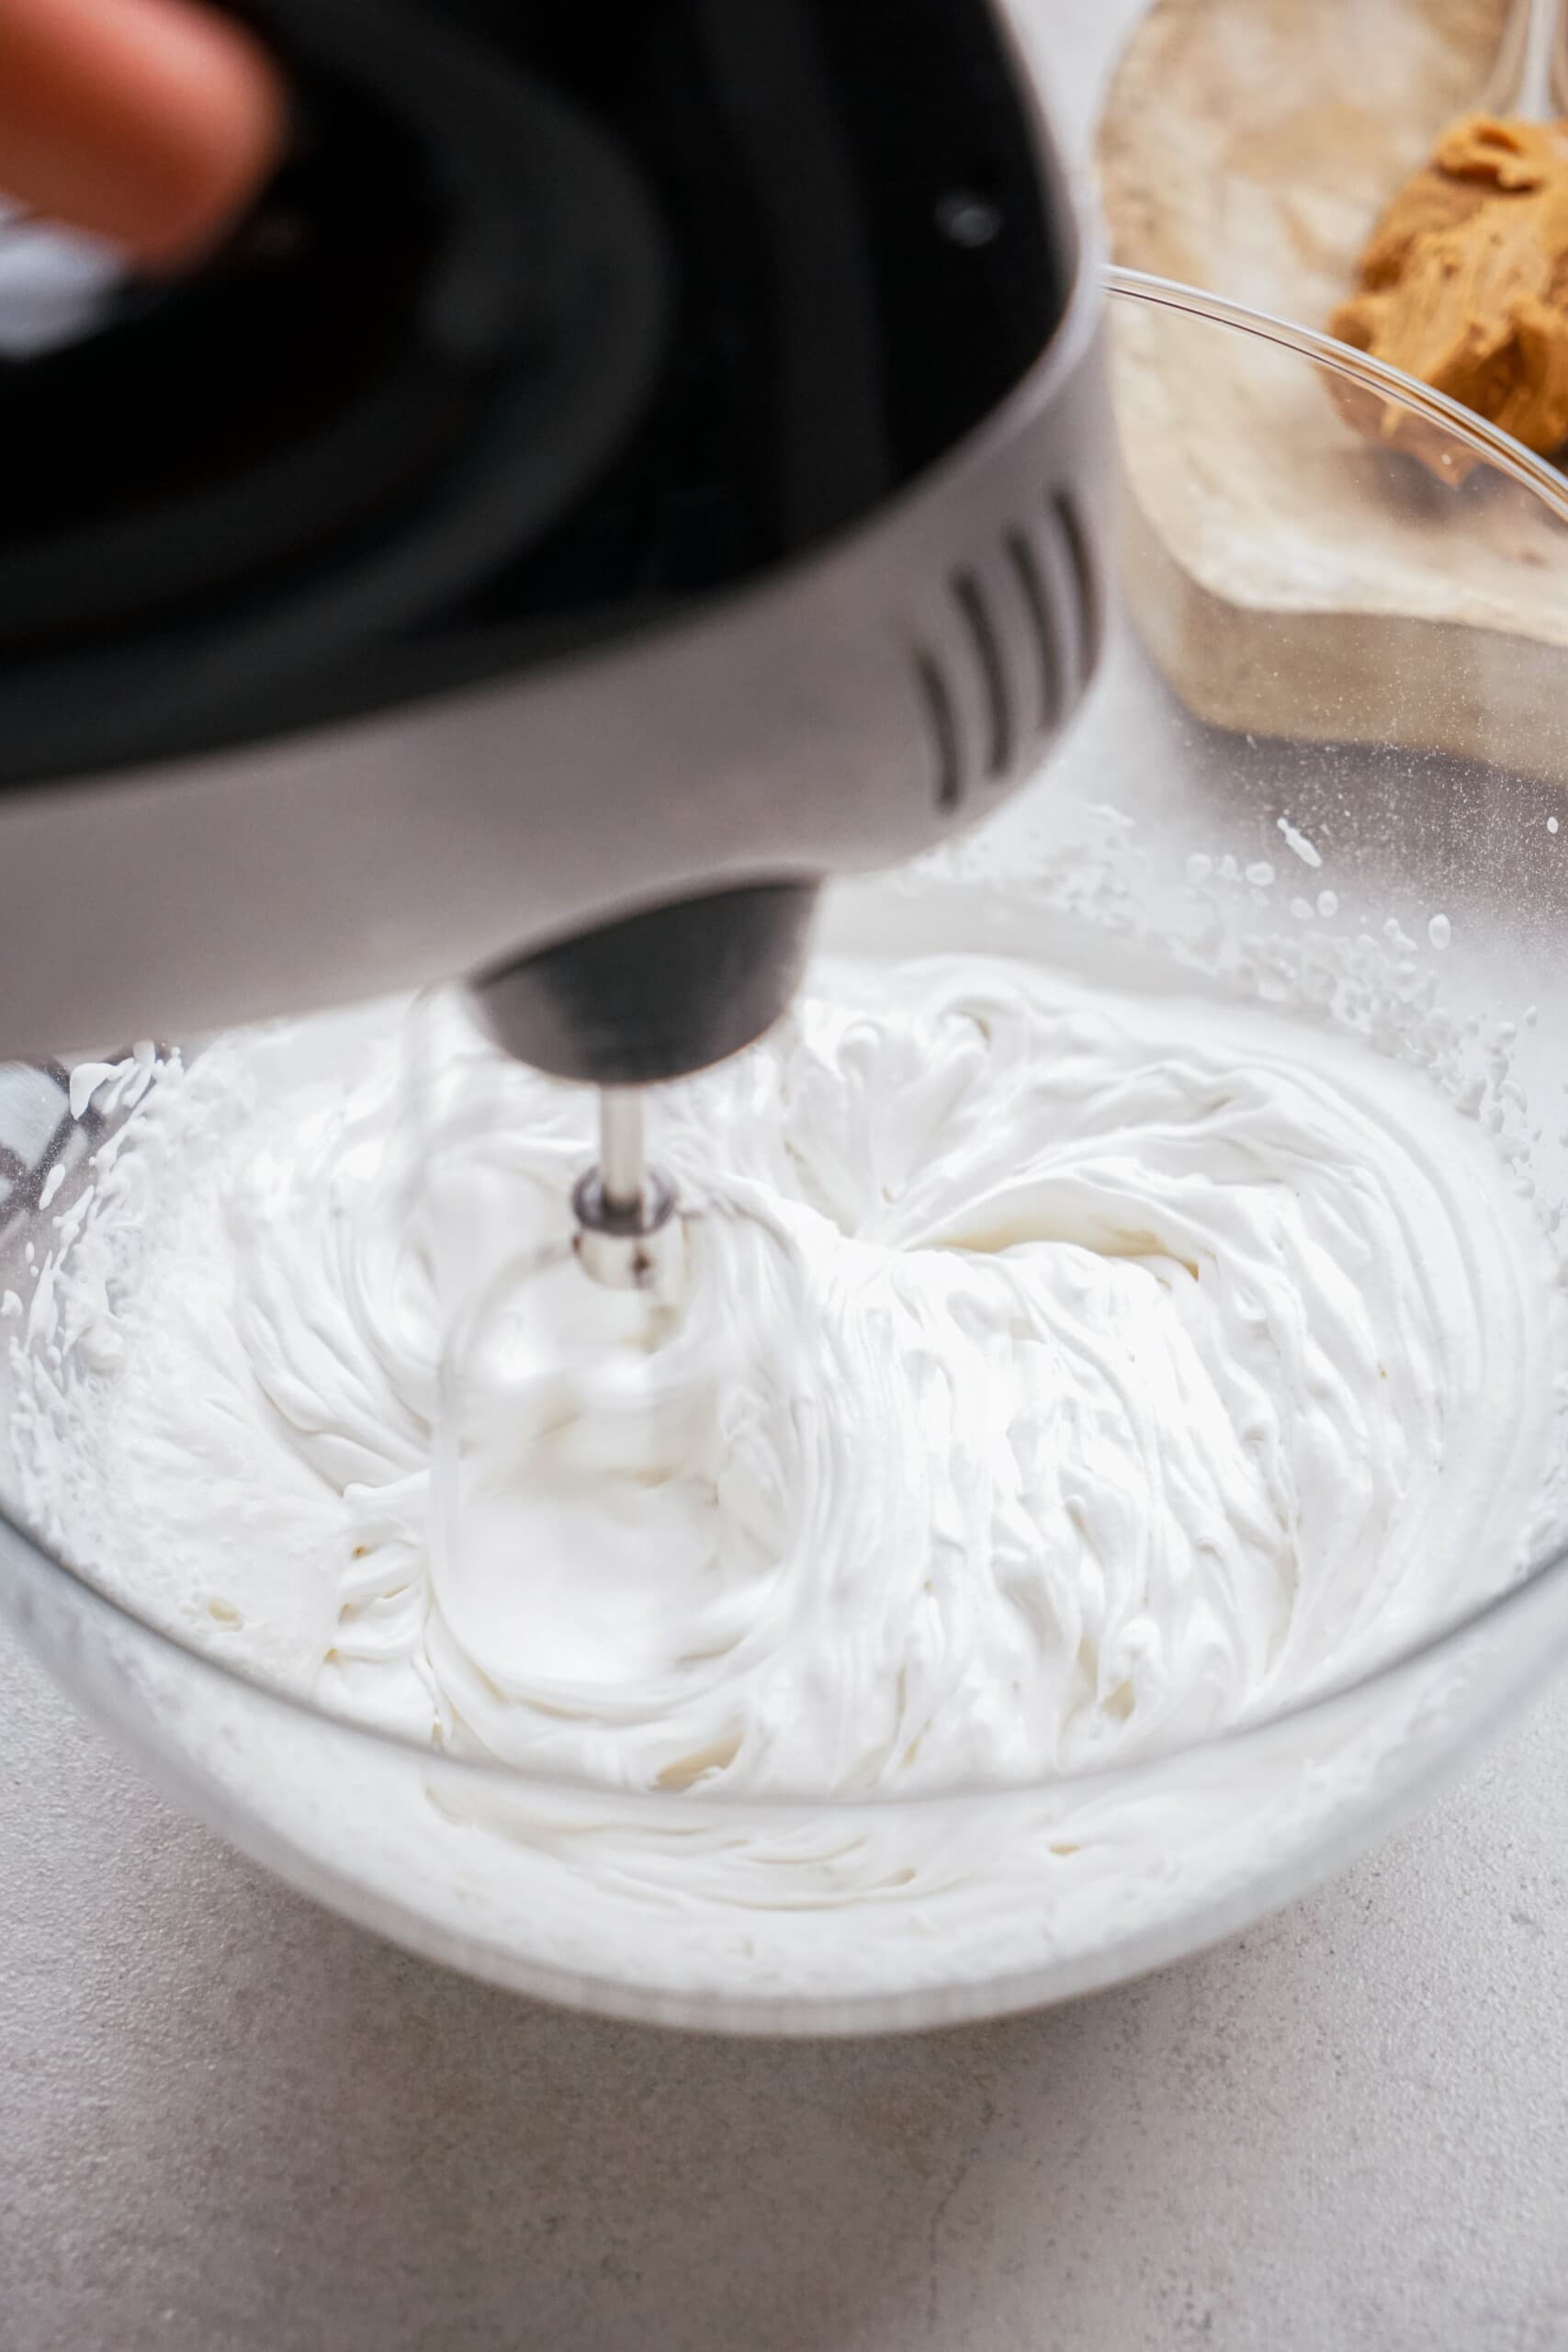 whipped cream being whisked with a hand mixer